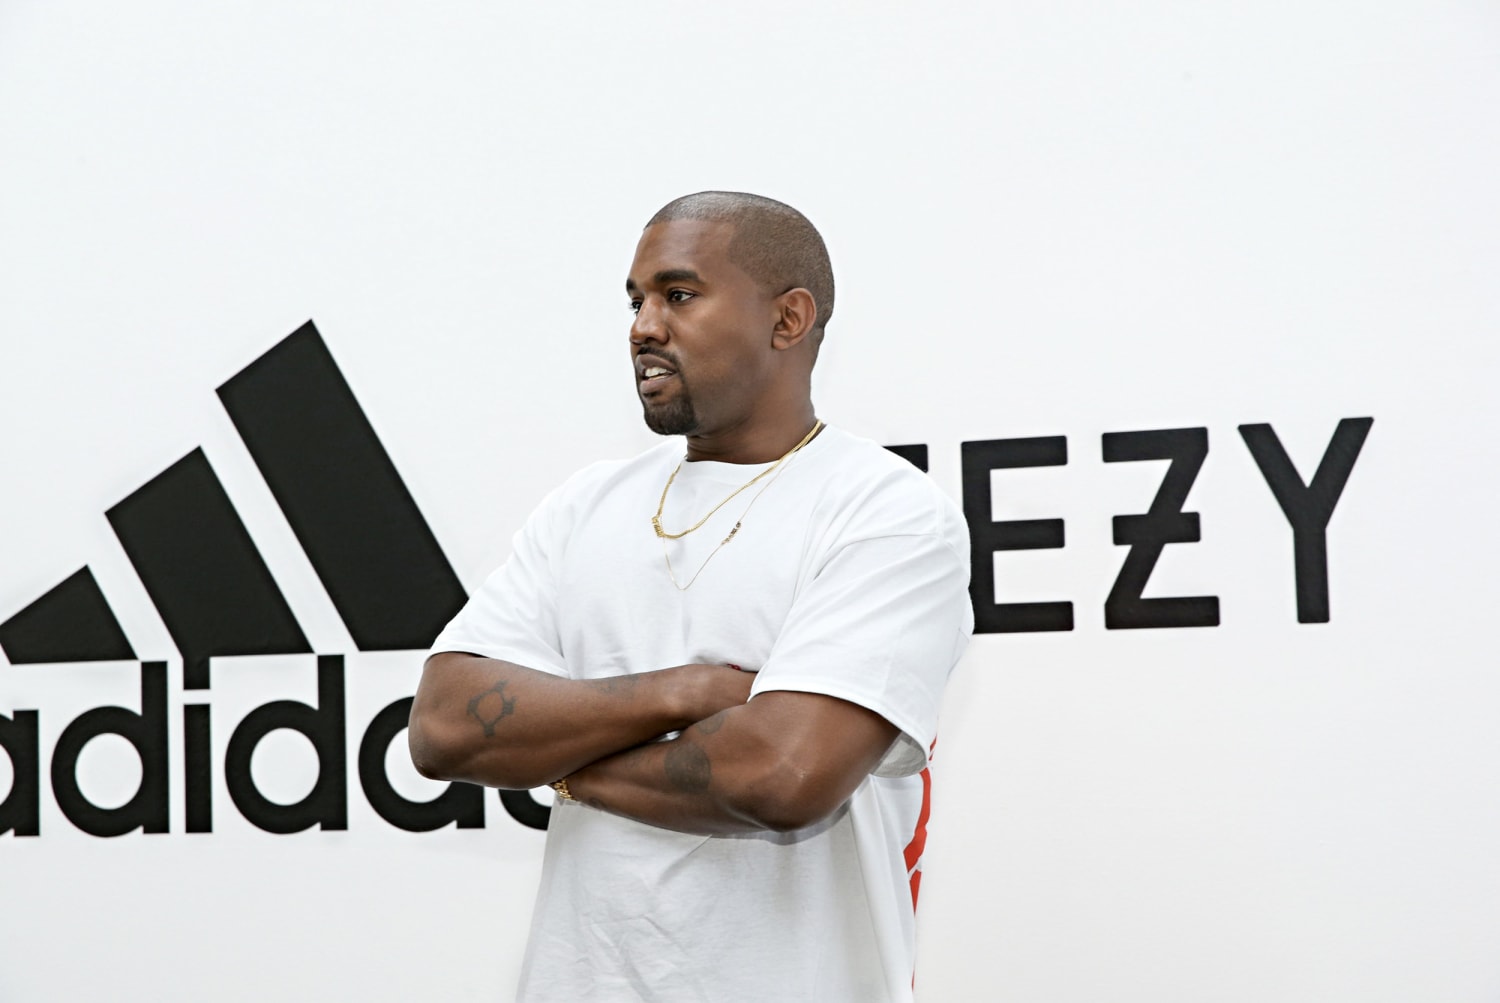 Adidas selling Yeezy shoes again after cutting ties with Kanye West